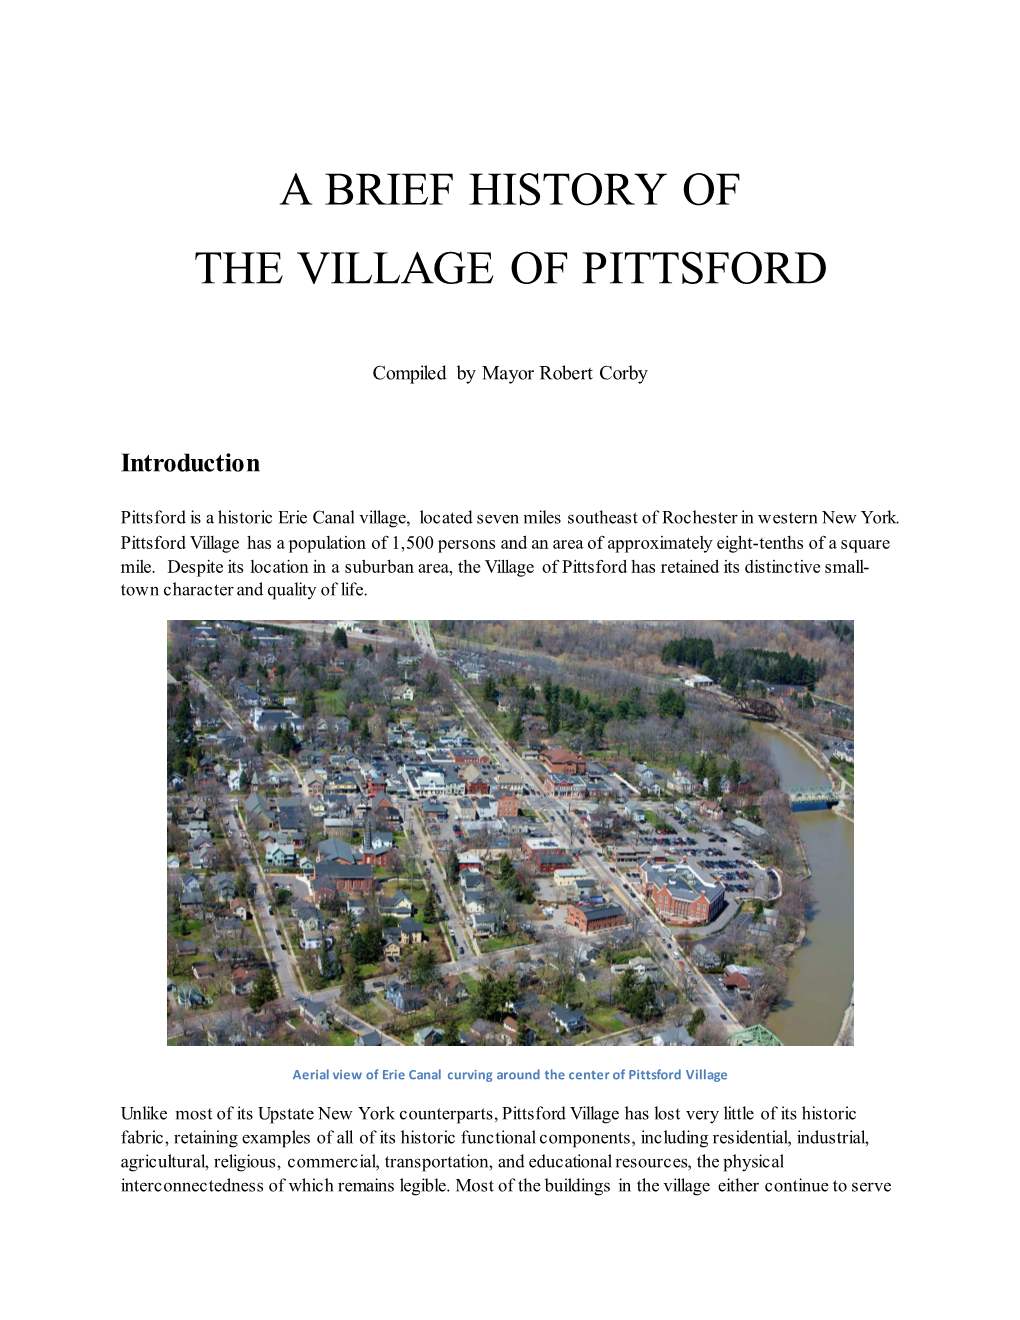 A Brief History of the Village of Pittsford